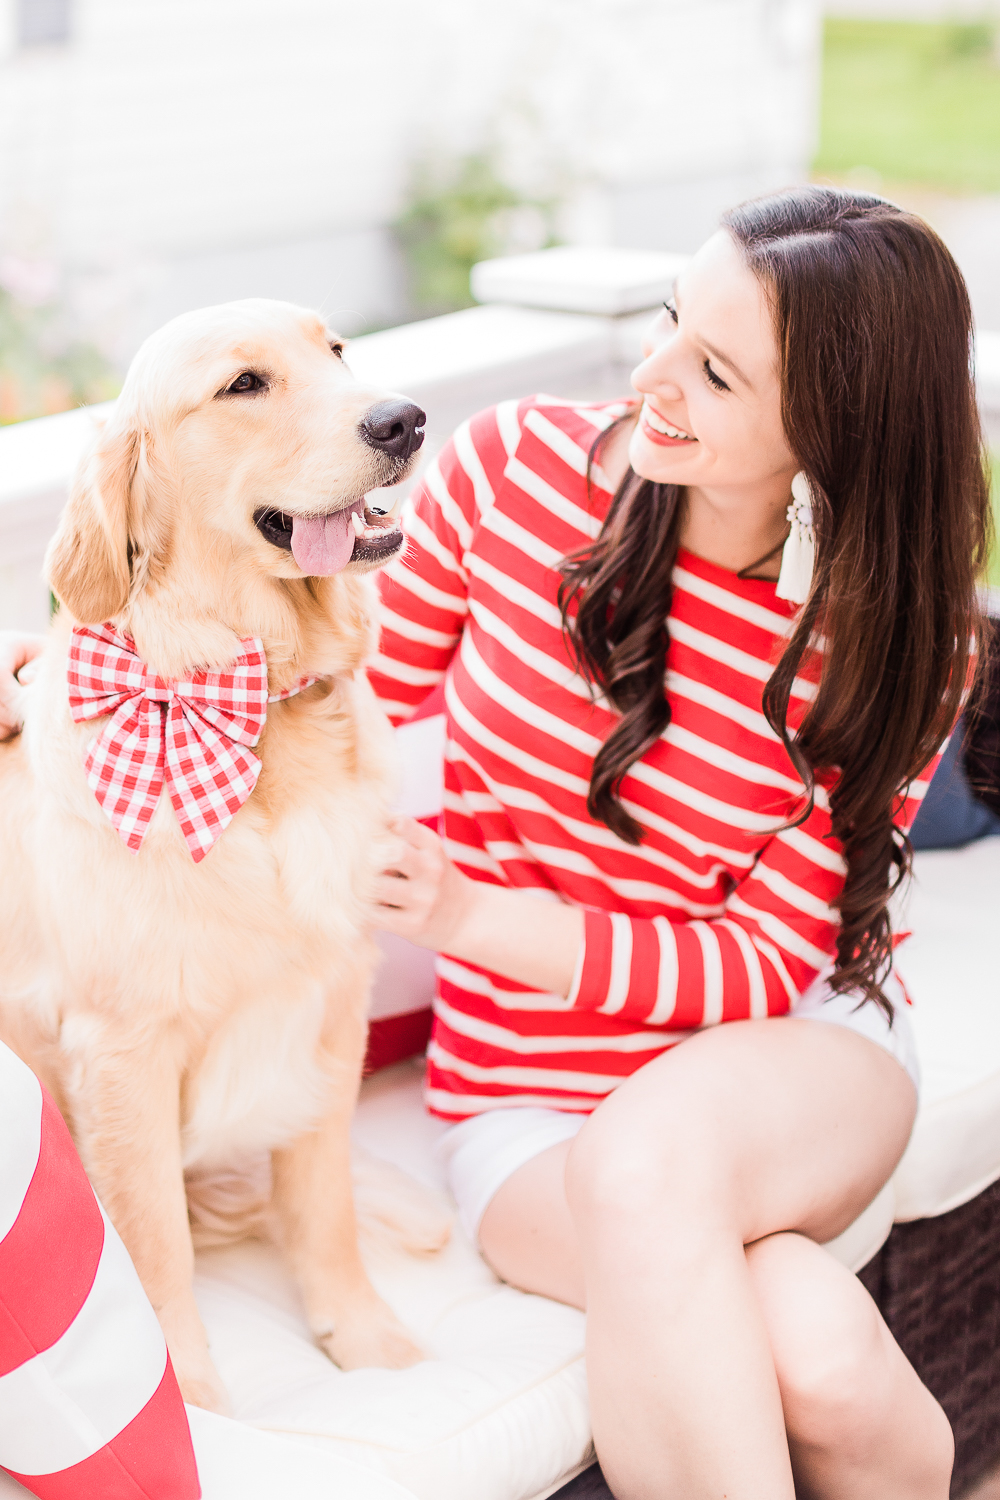 4th of July golden retriever puppies with red gingham bows and collars, 10 Preppy 4th of July Outfit Ideas for Women by popular affordable fashion blogger Stephanie Ziajka from Diary of a Debutante